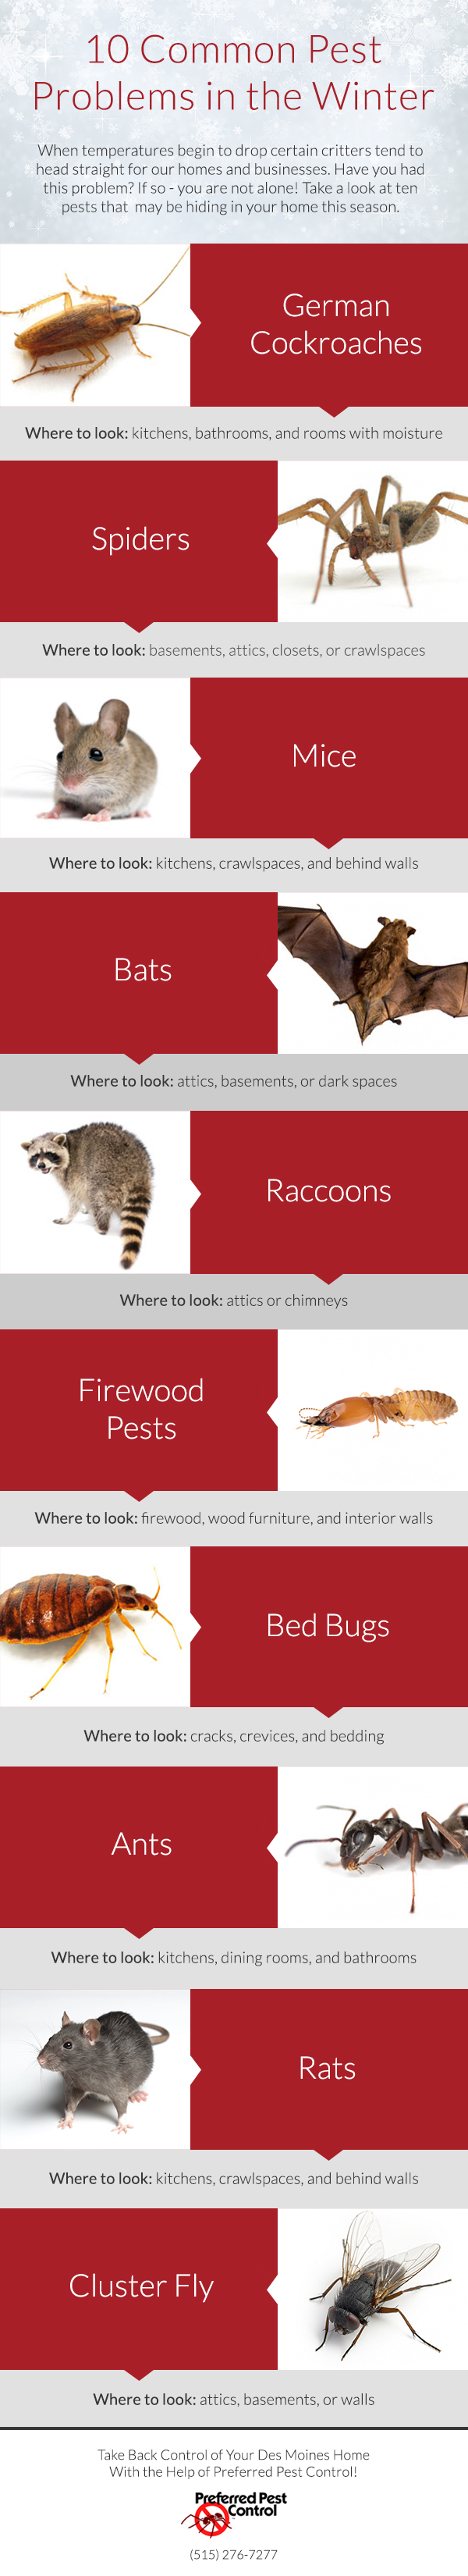 10 Common Pest Problems During the Winter